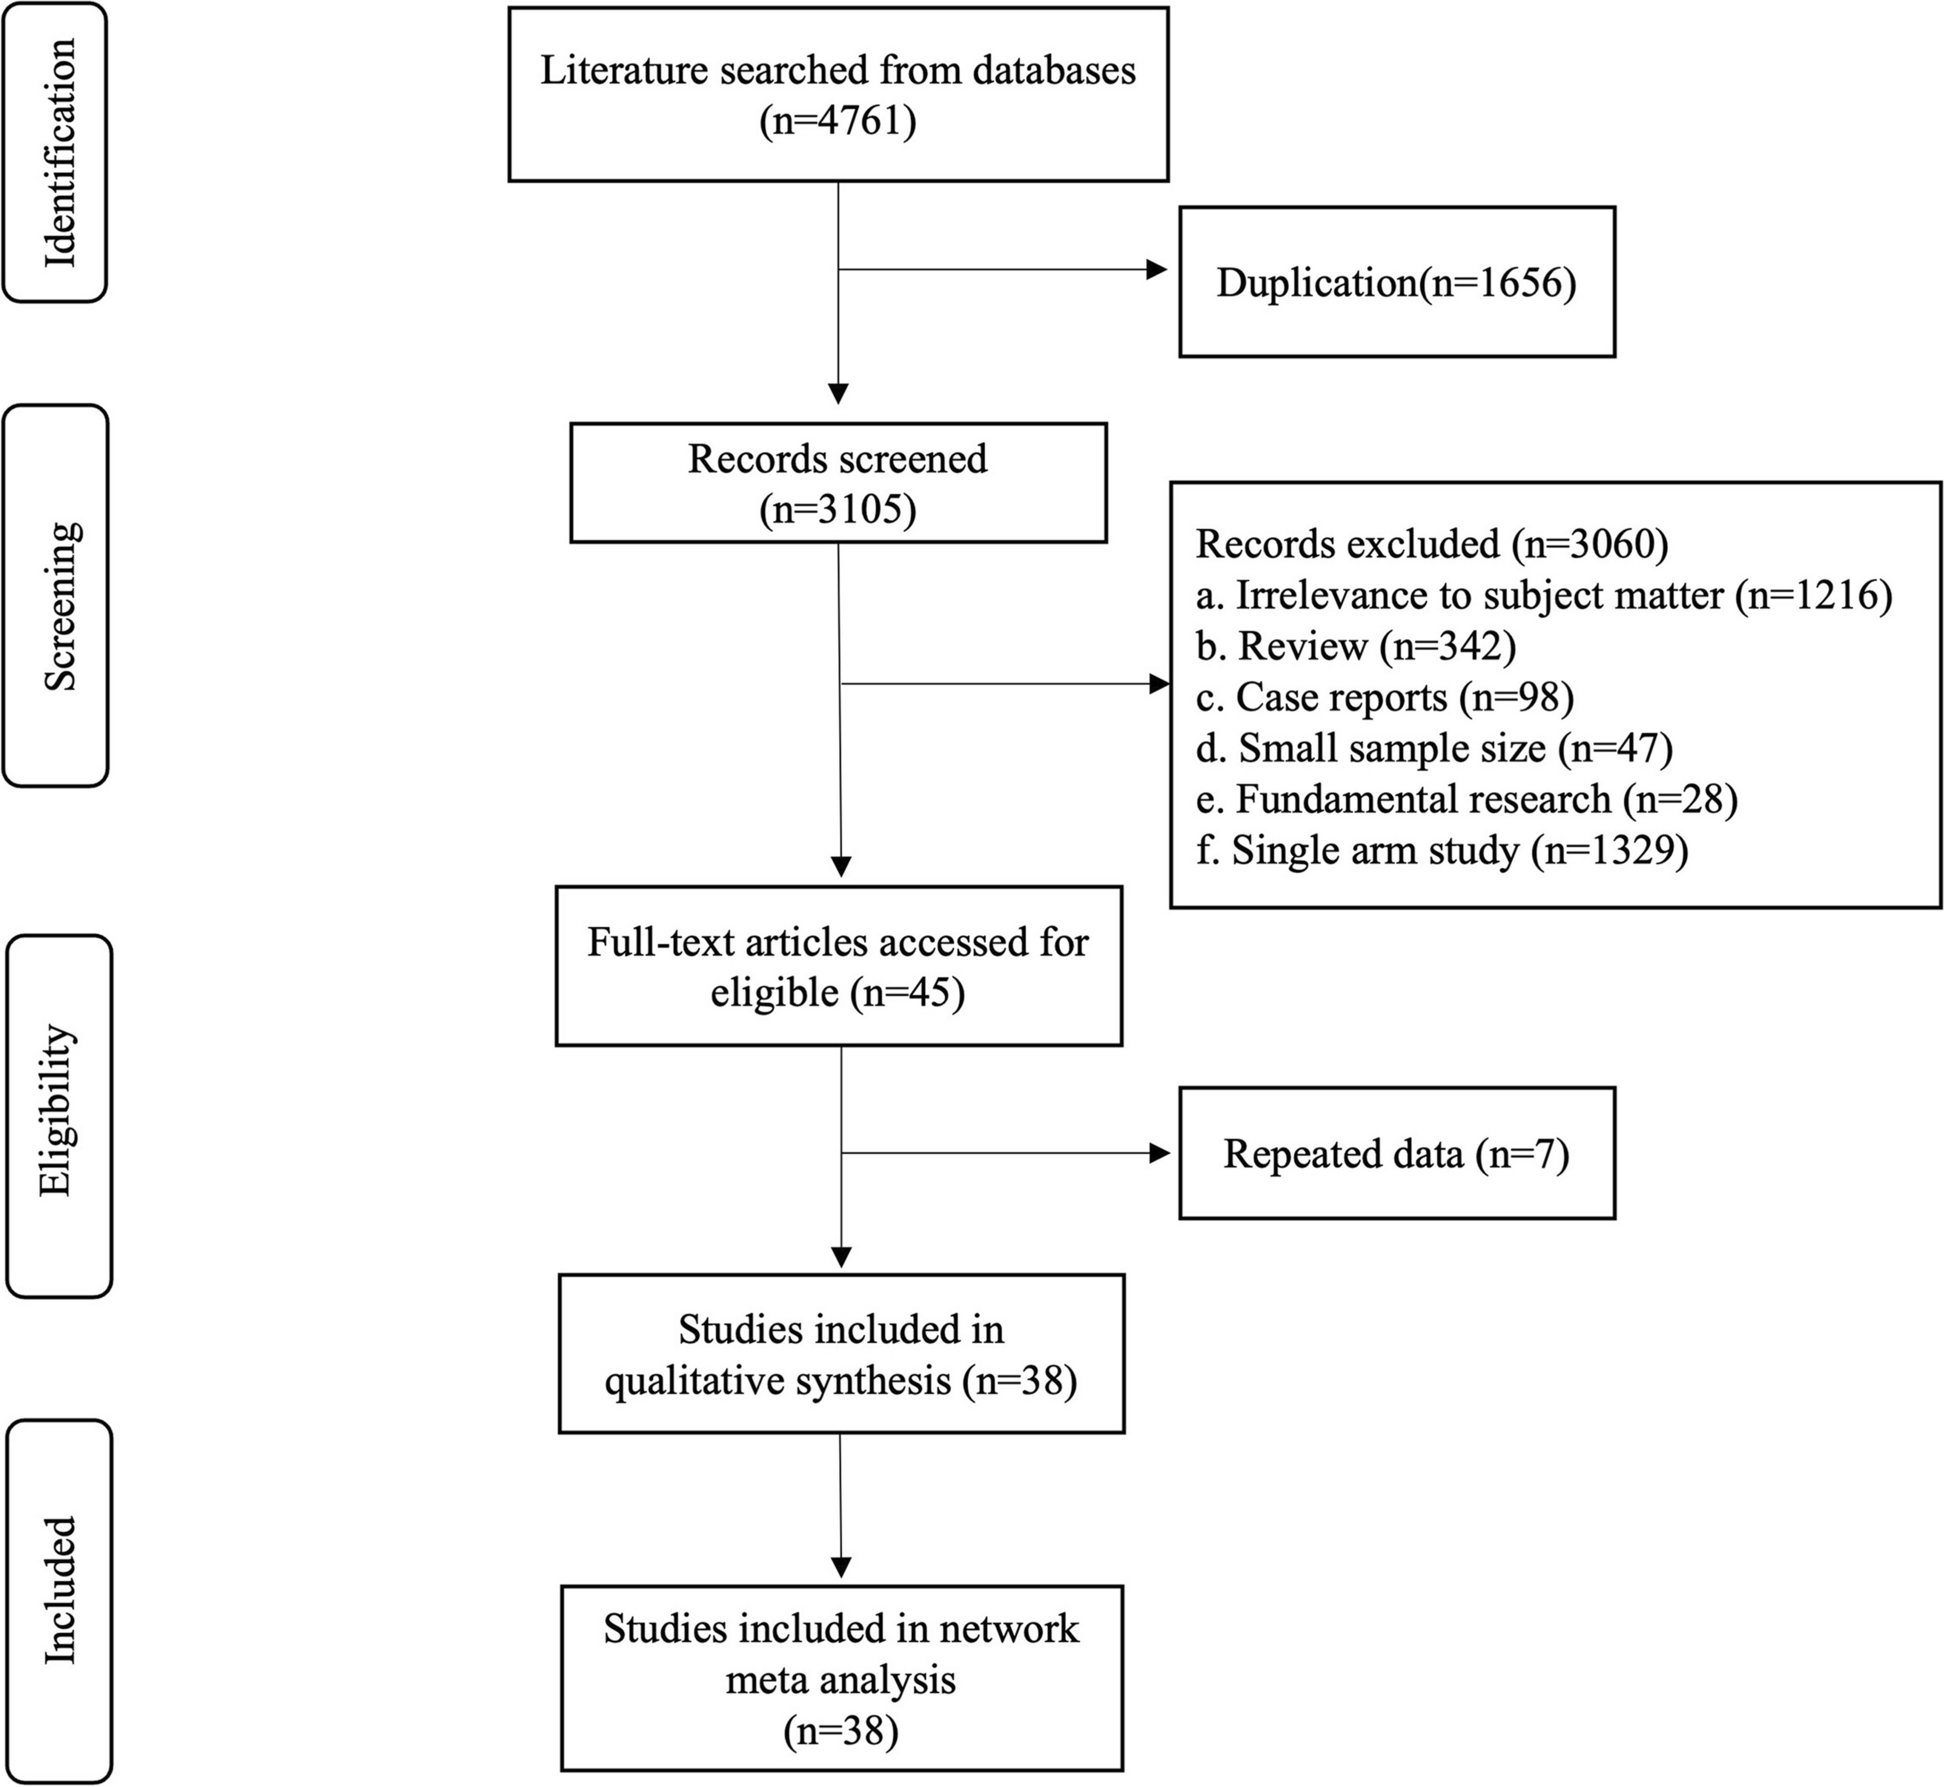 The safety and efficacy of five surgical treatments in prostate enucleation: a network meta-analysis